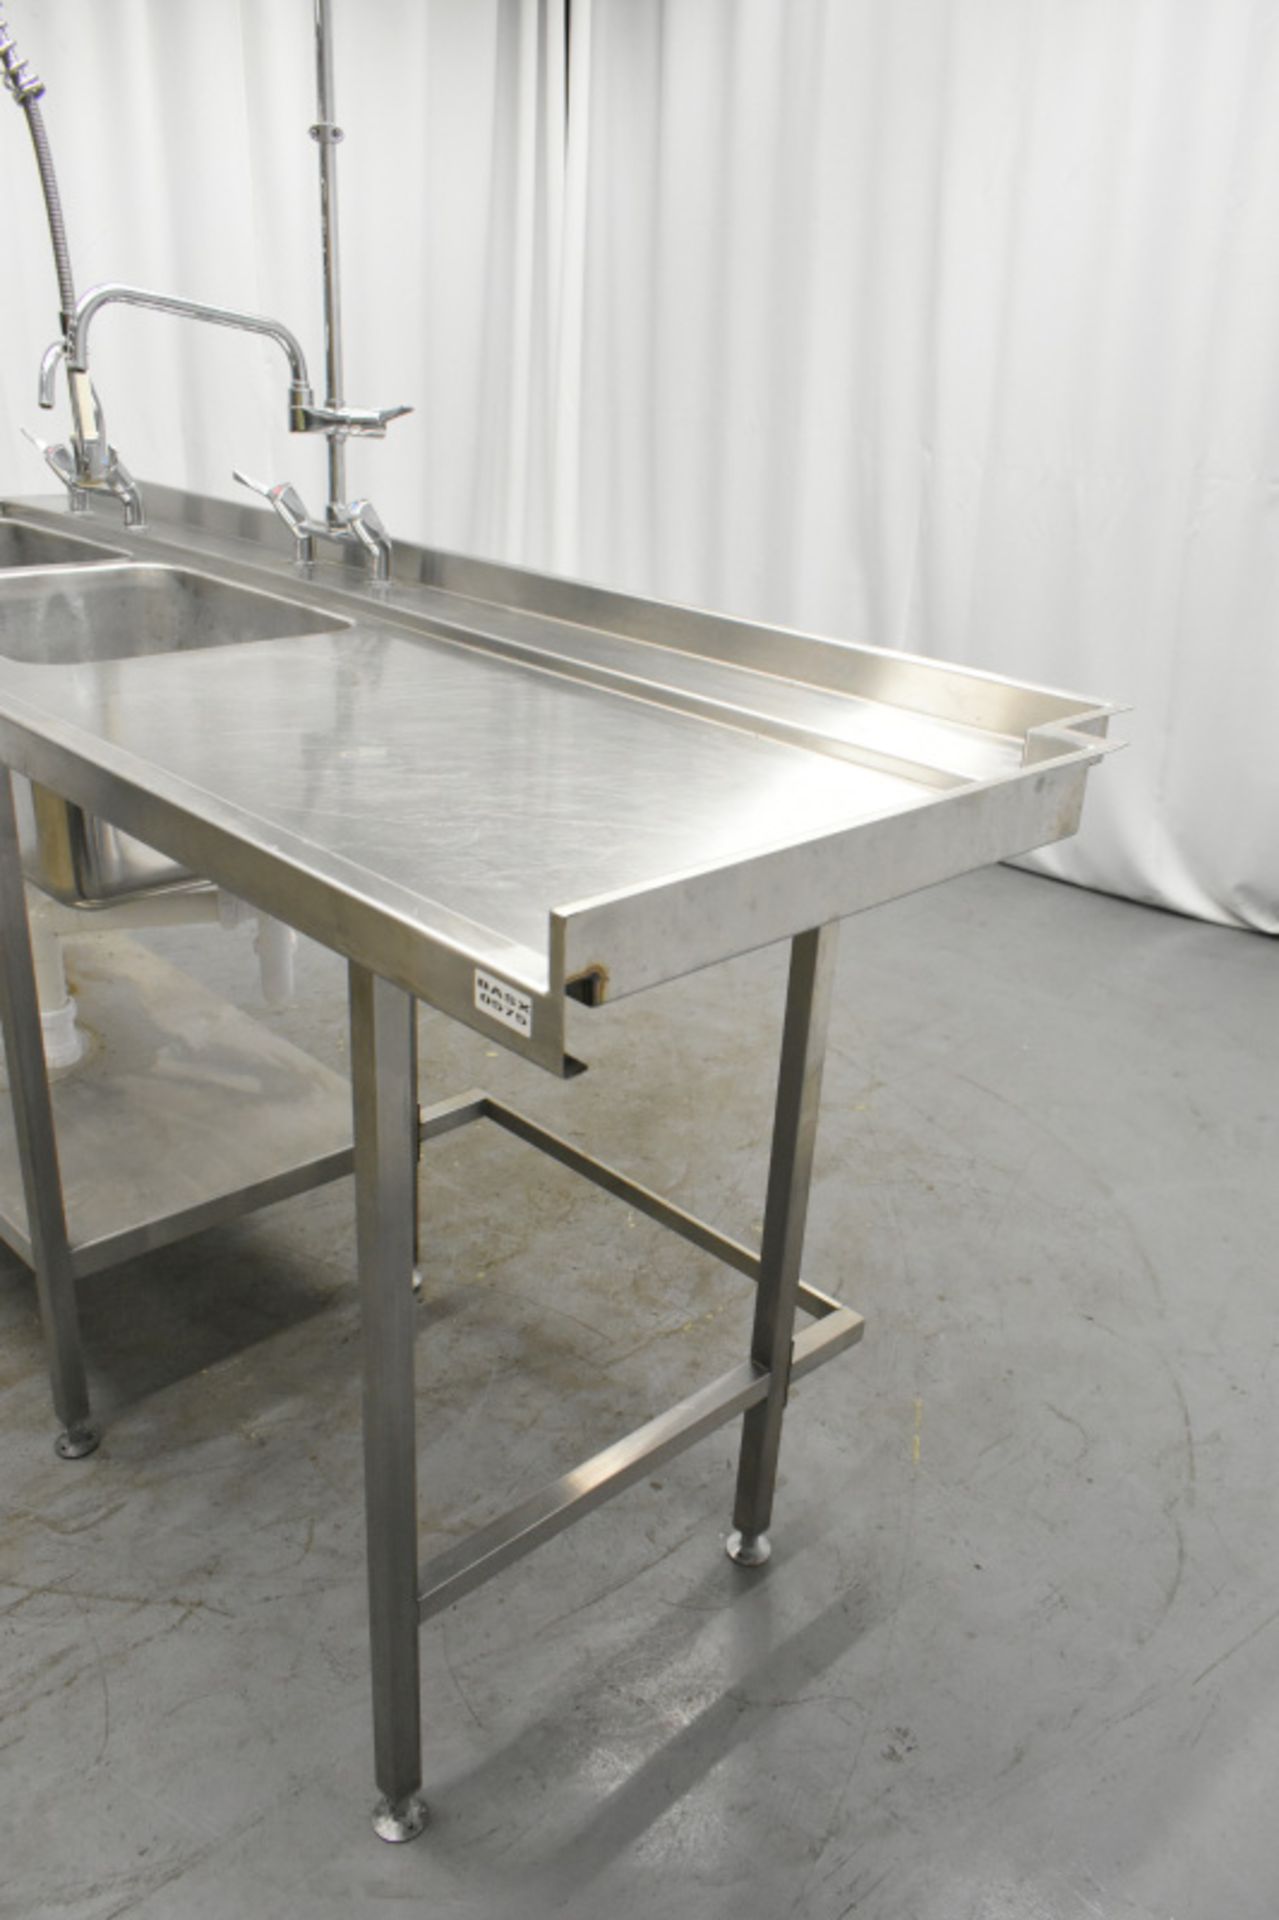 Stainless Steel Double sink Unit - Image 7 of 9